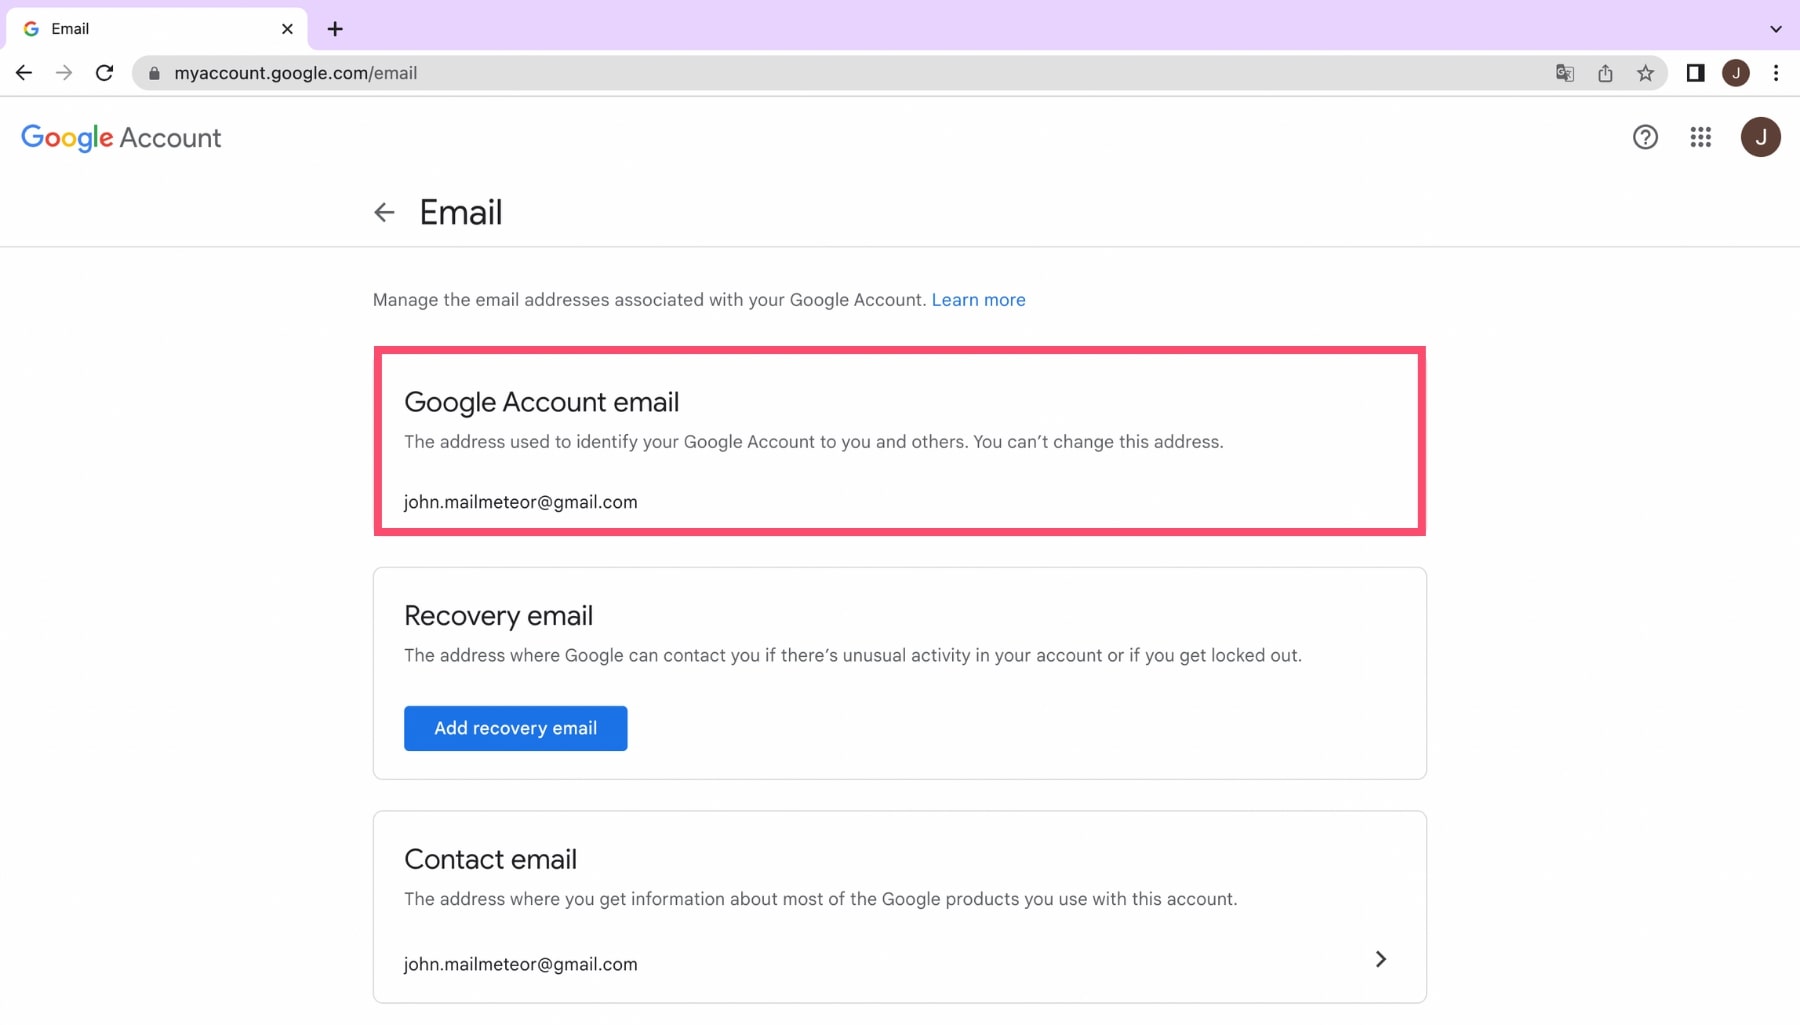 Change your Gmail address from your Google Account